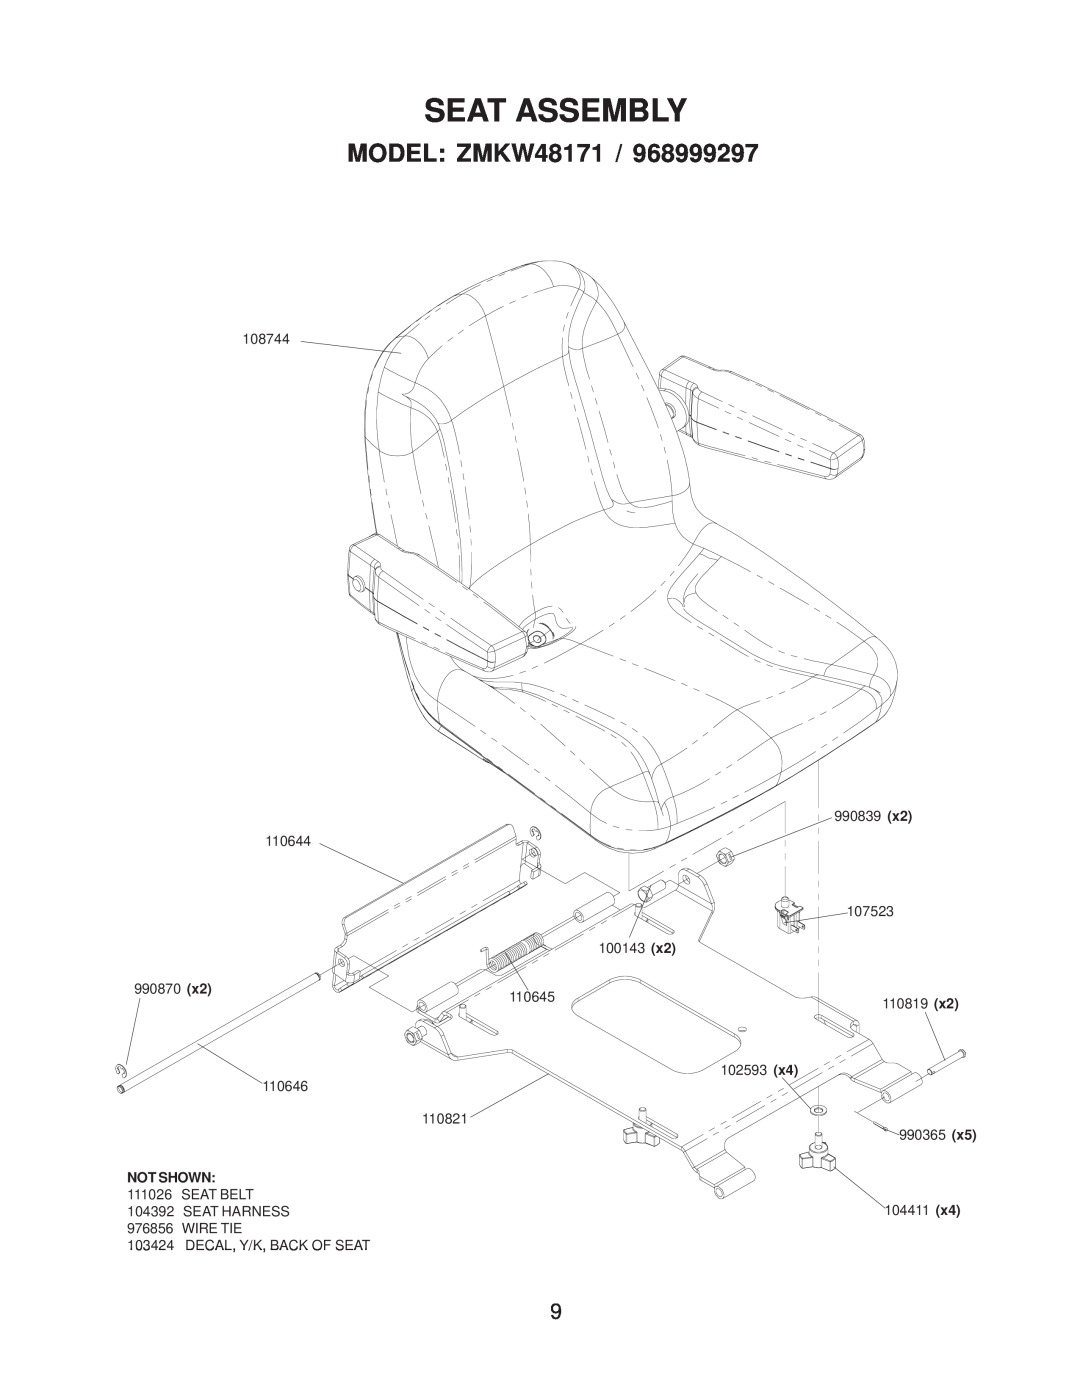 Yazoo/Kees manual Seat Assembly, MODEL ZMKW48171 